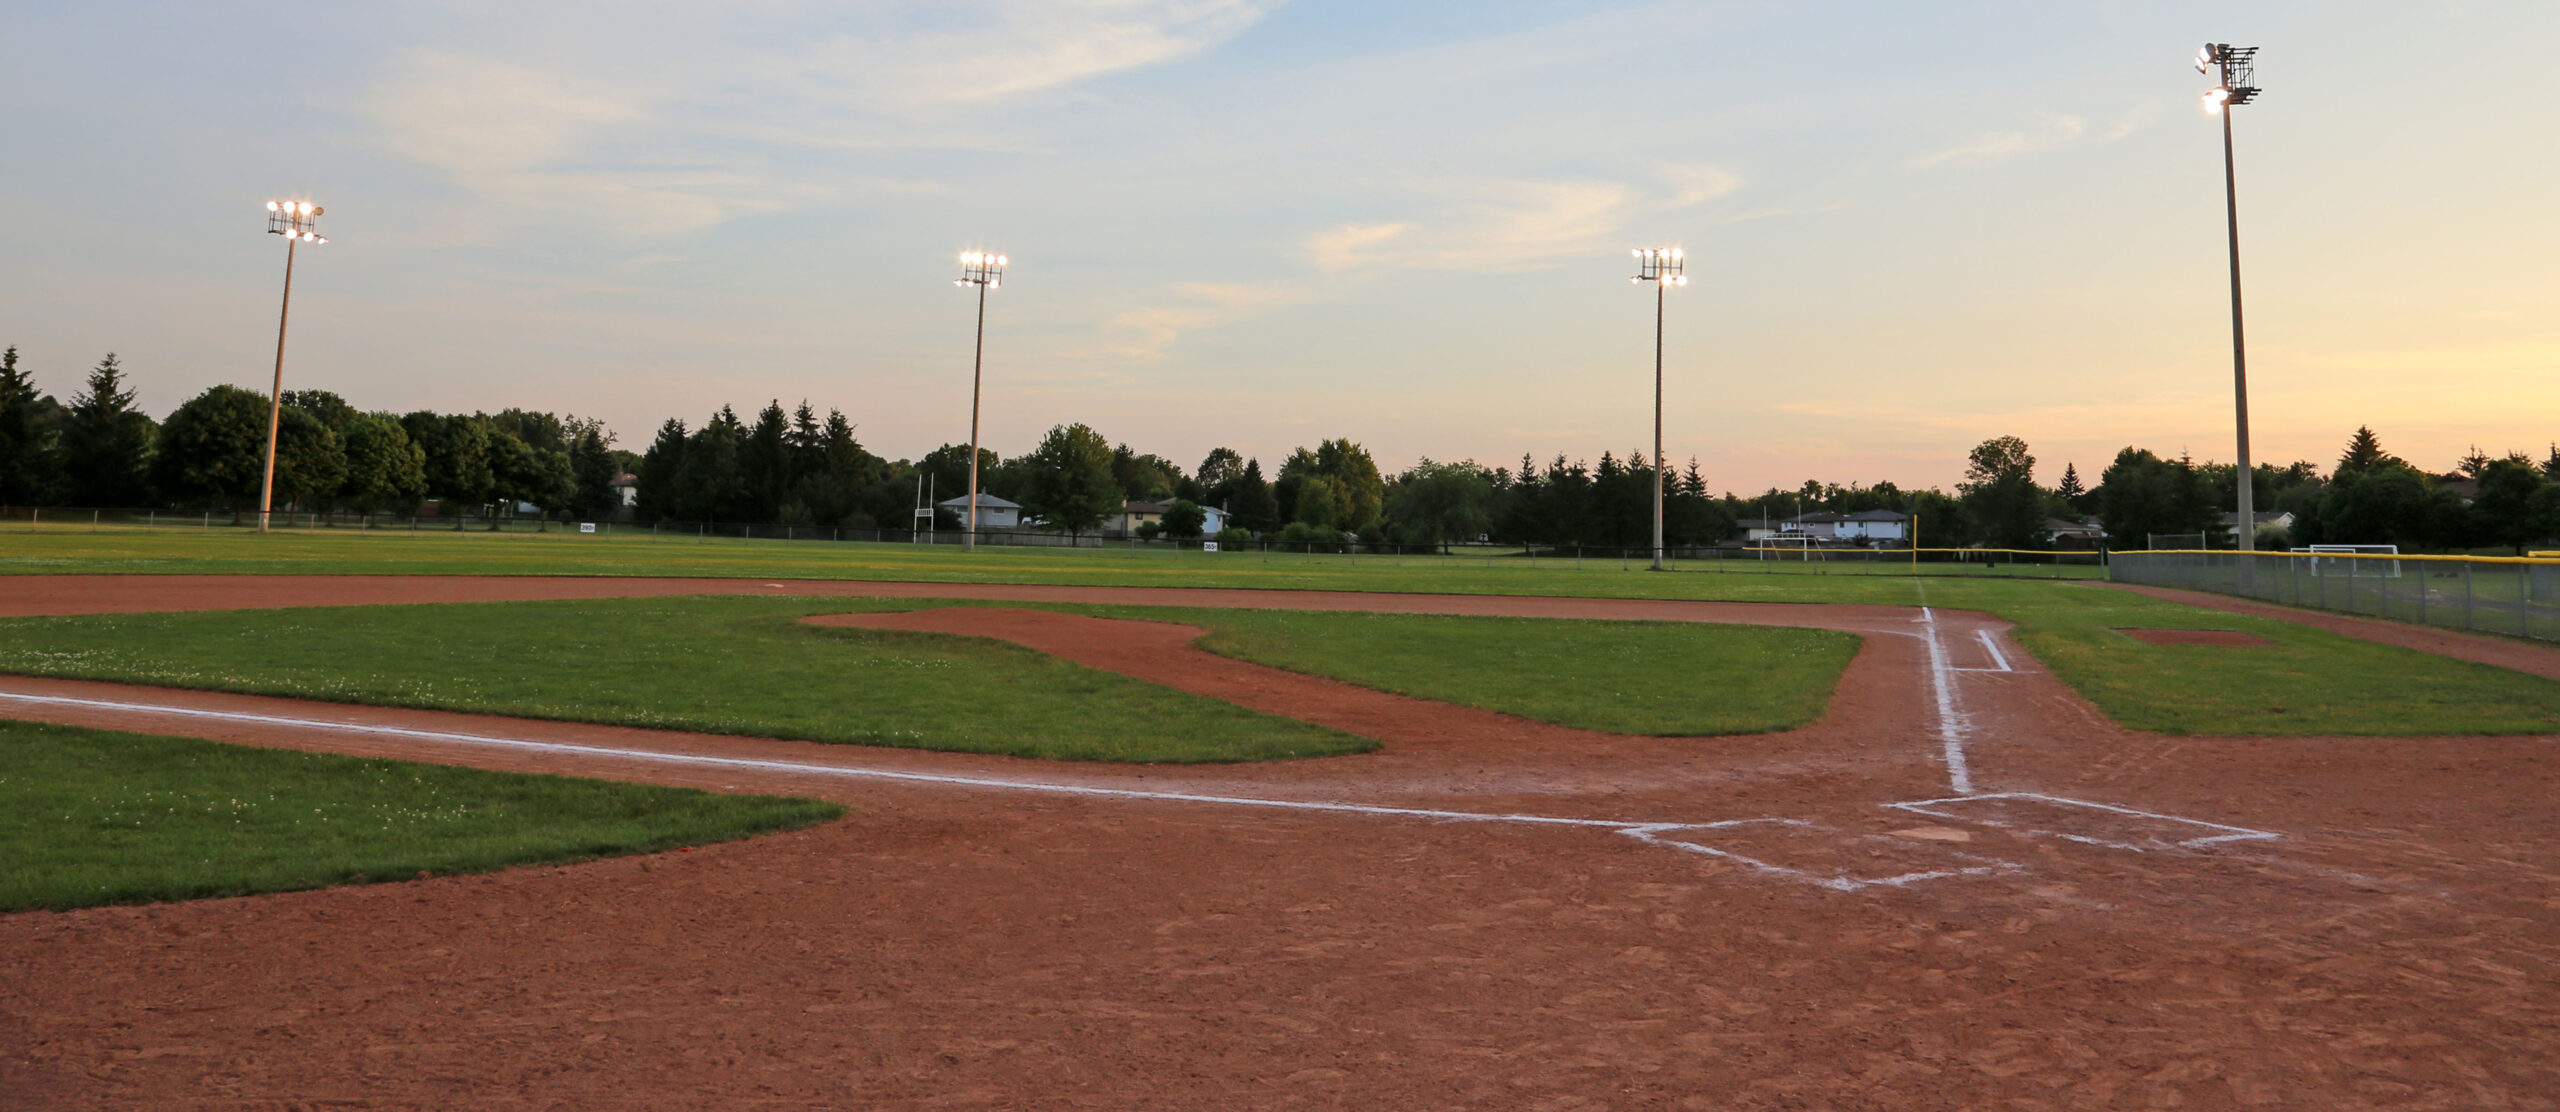 A Little League field in late summer, early evening, with the lights on.